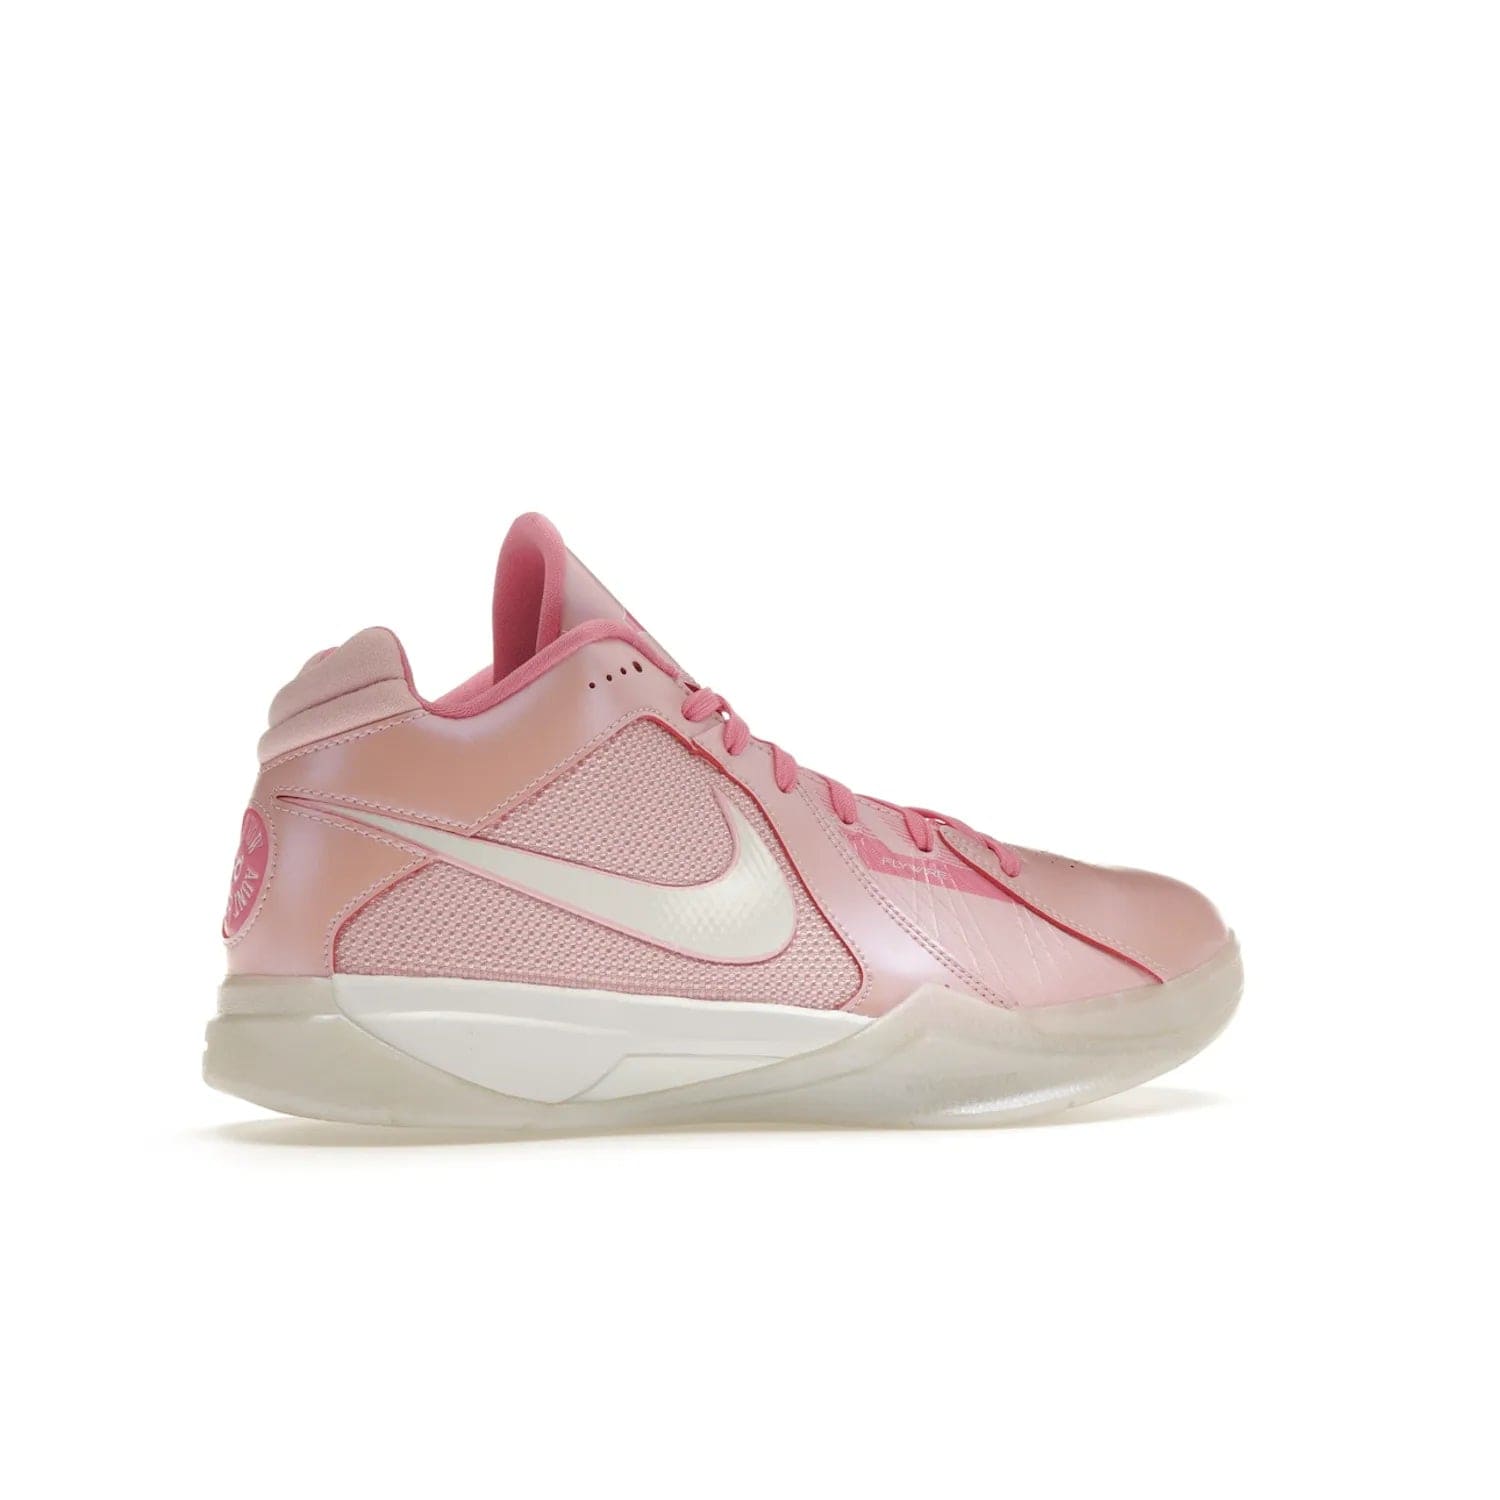 Nike KD 3 Aunt Pearl - Image 35 - Only at www.BallersClubKickz.com - Introducing the Nike KD 3 Aunt Pearl. Featuring a bold Medium Soft Pink, White, & Lotus Pink colorway. Get ready to stand out this October 15th.